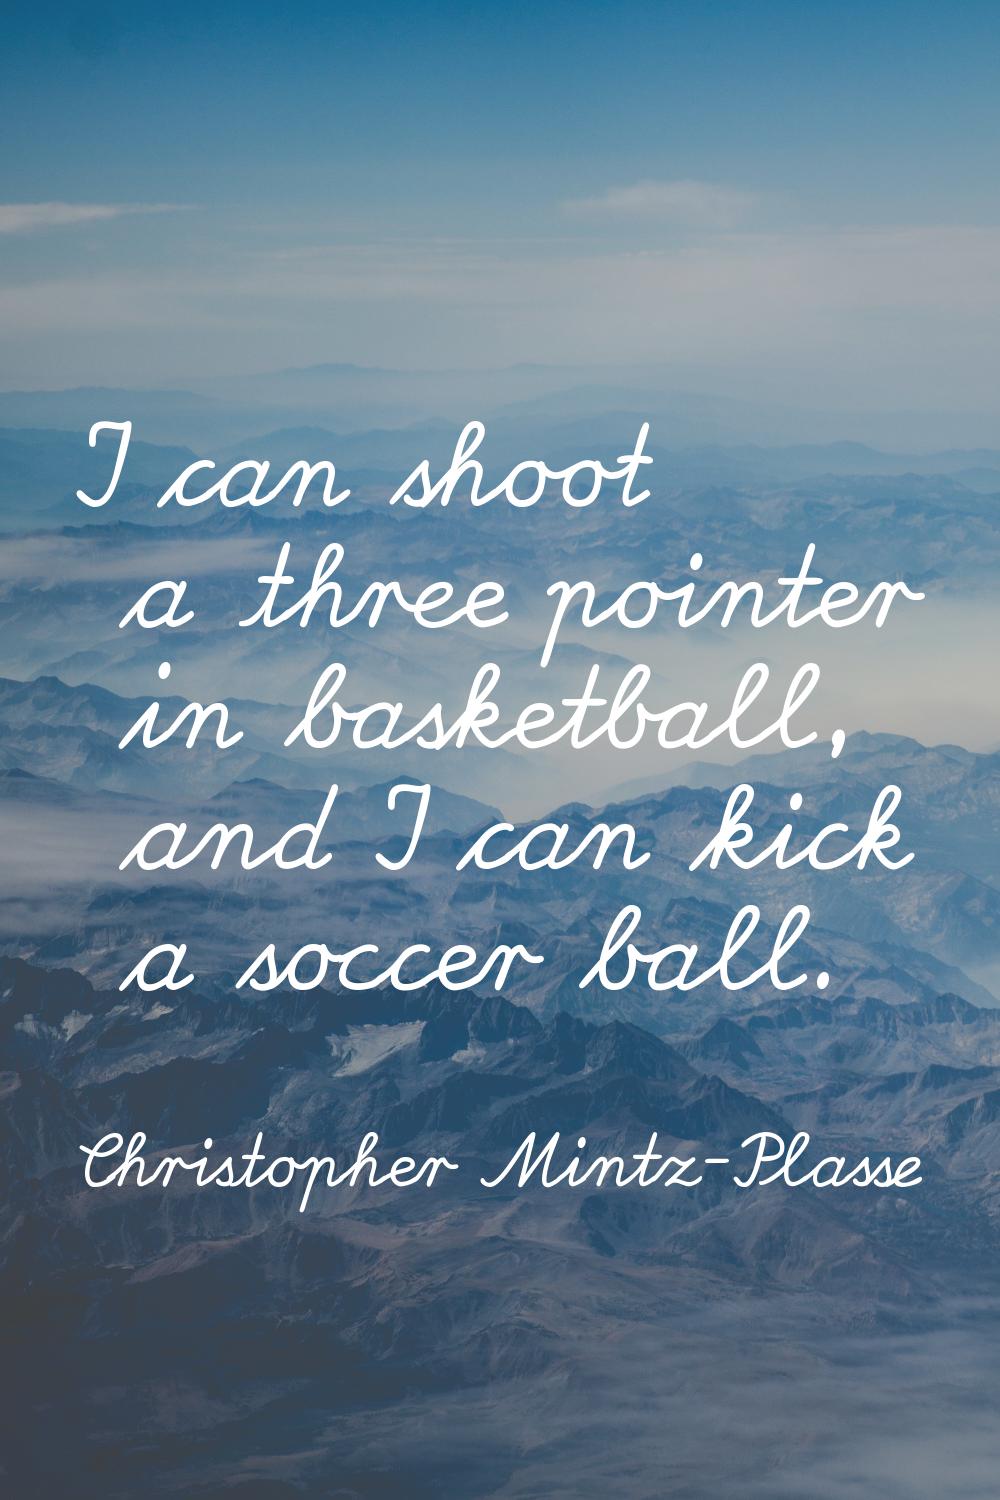 I can shoot a three pointer in basketball, and I can kick a soccer ball.